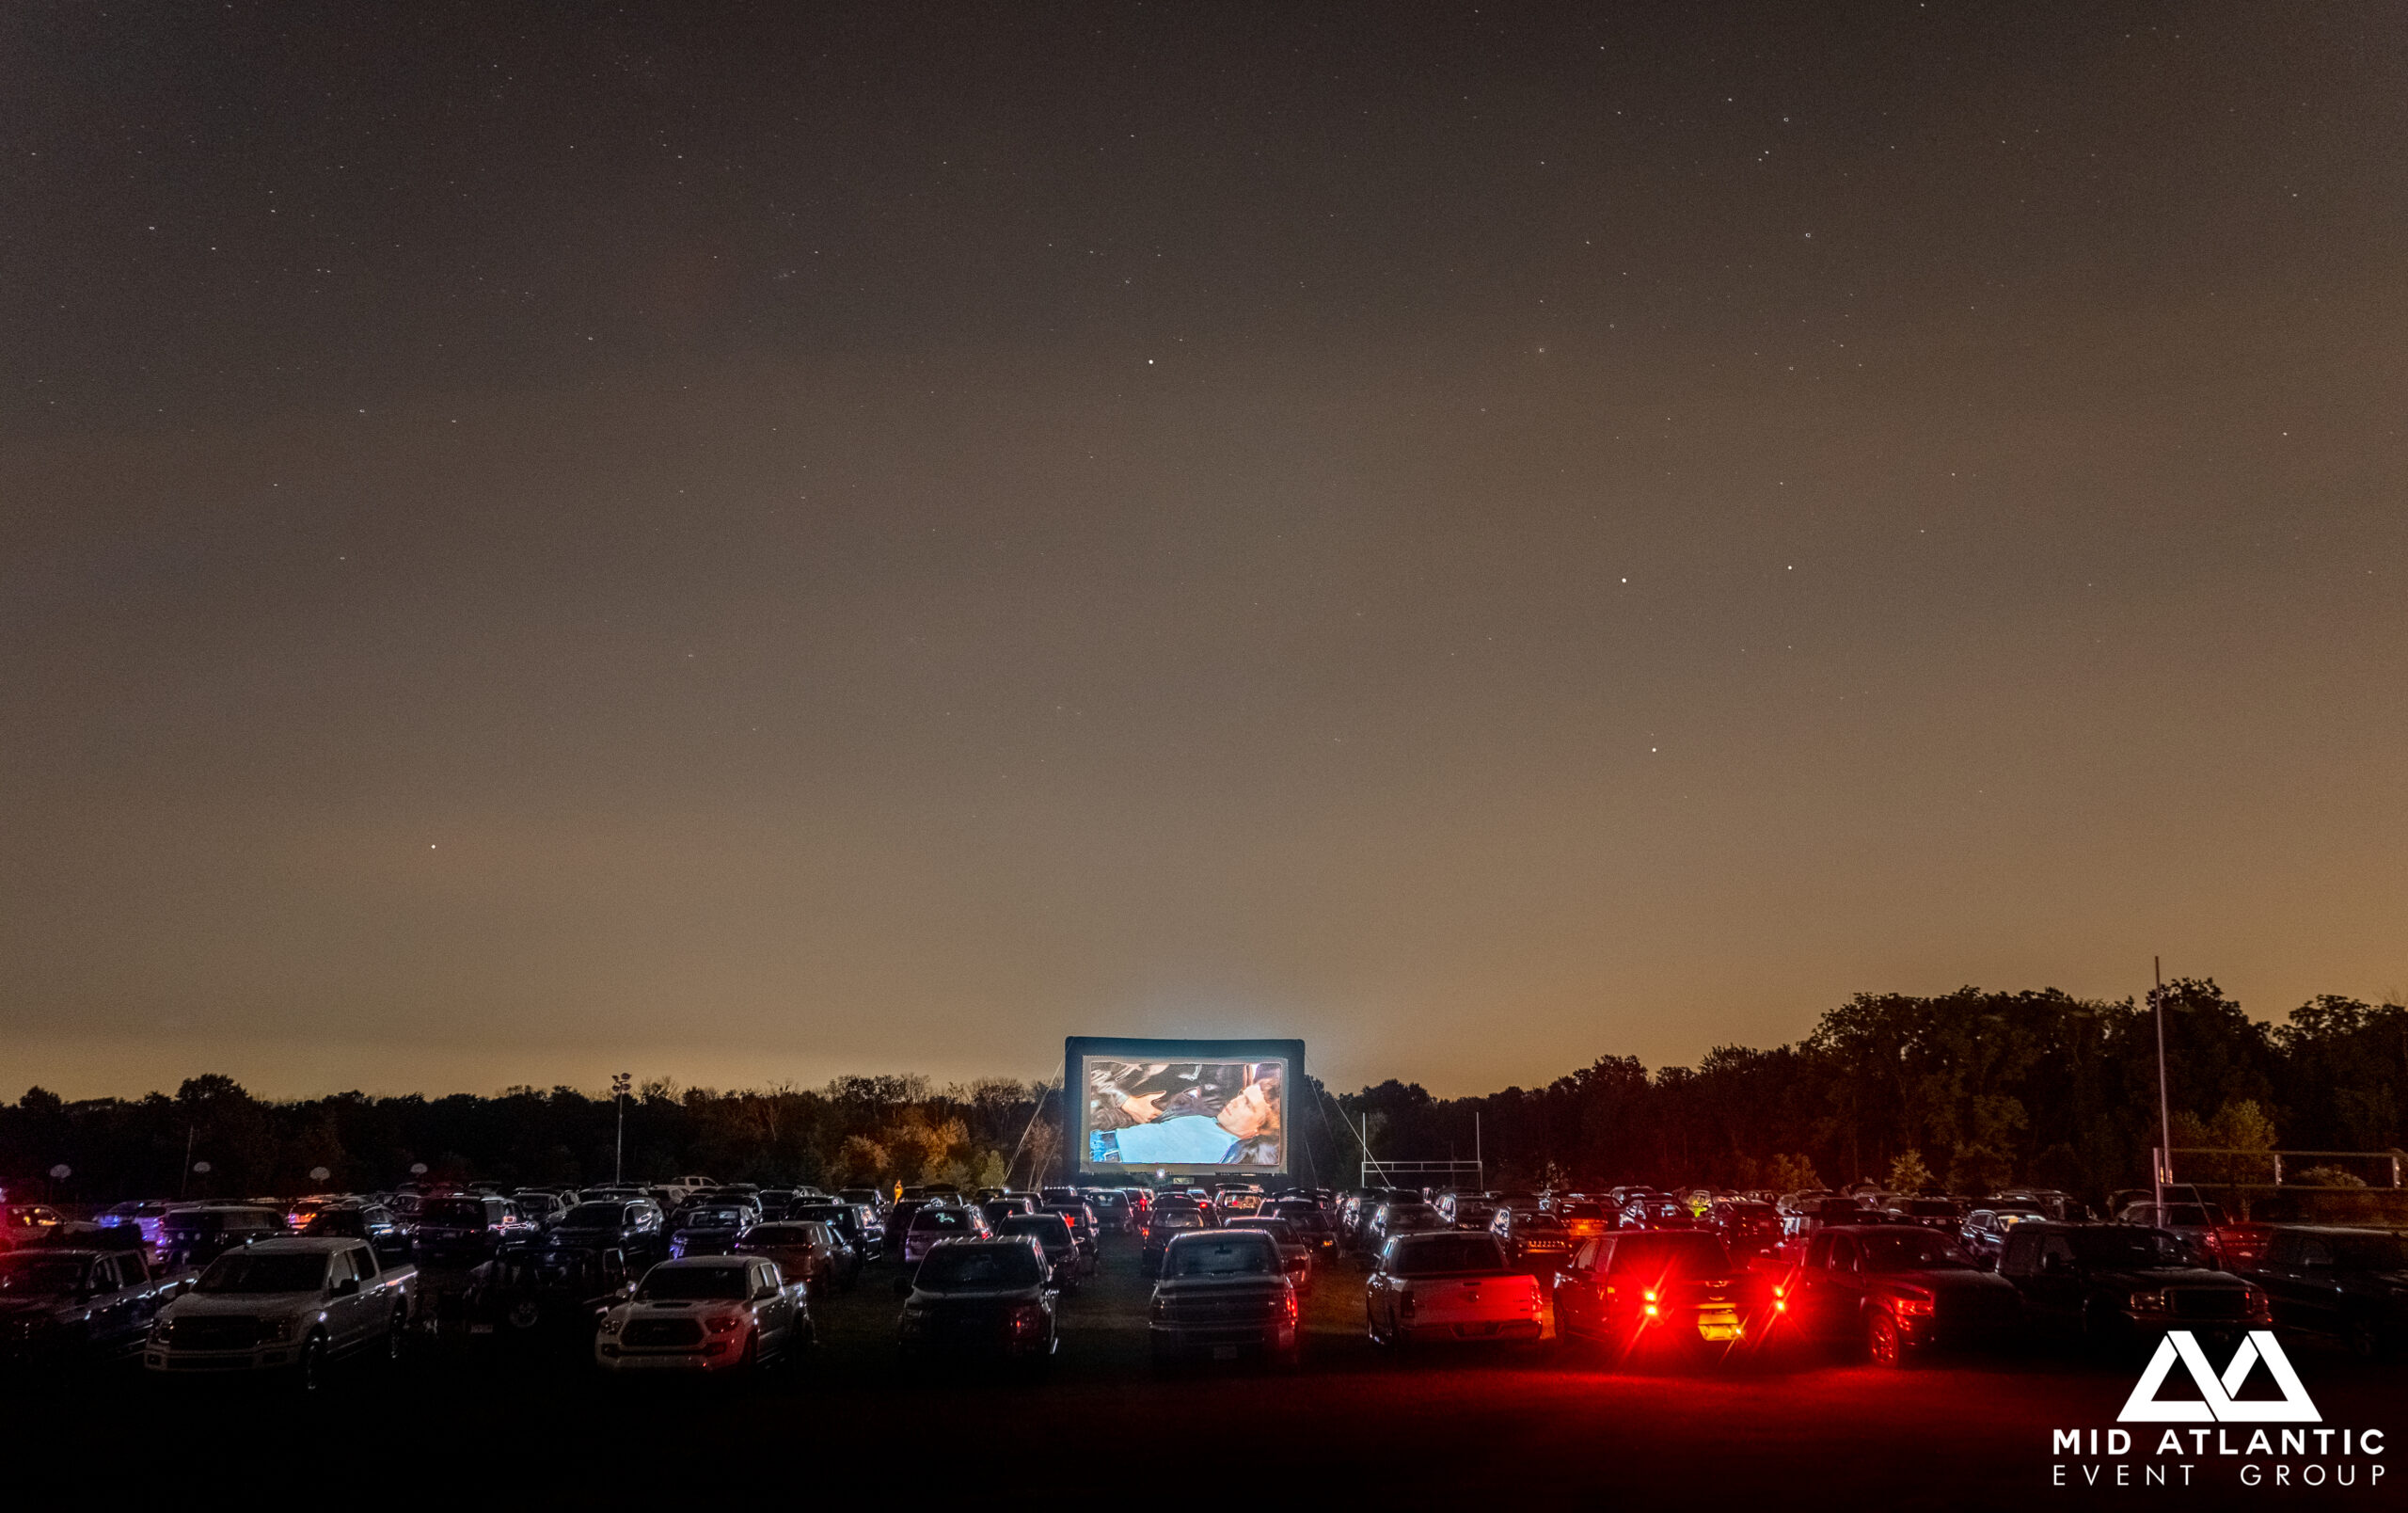 Drive In Movie